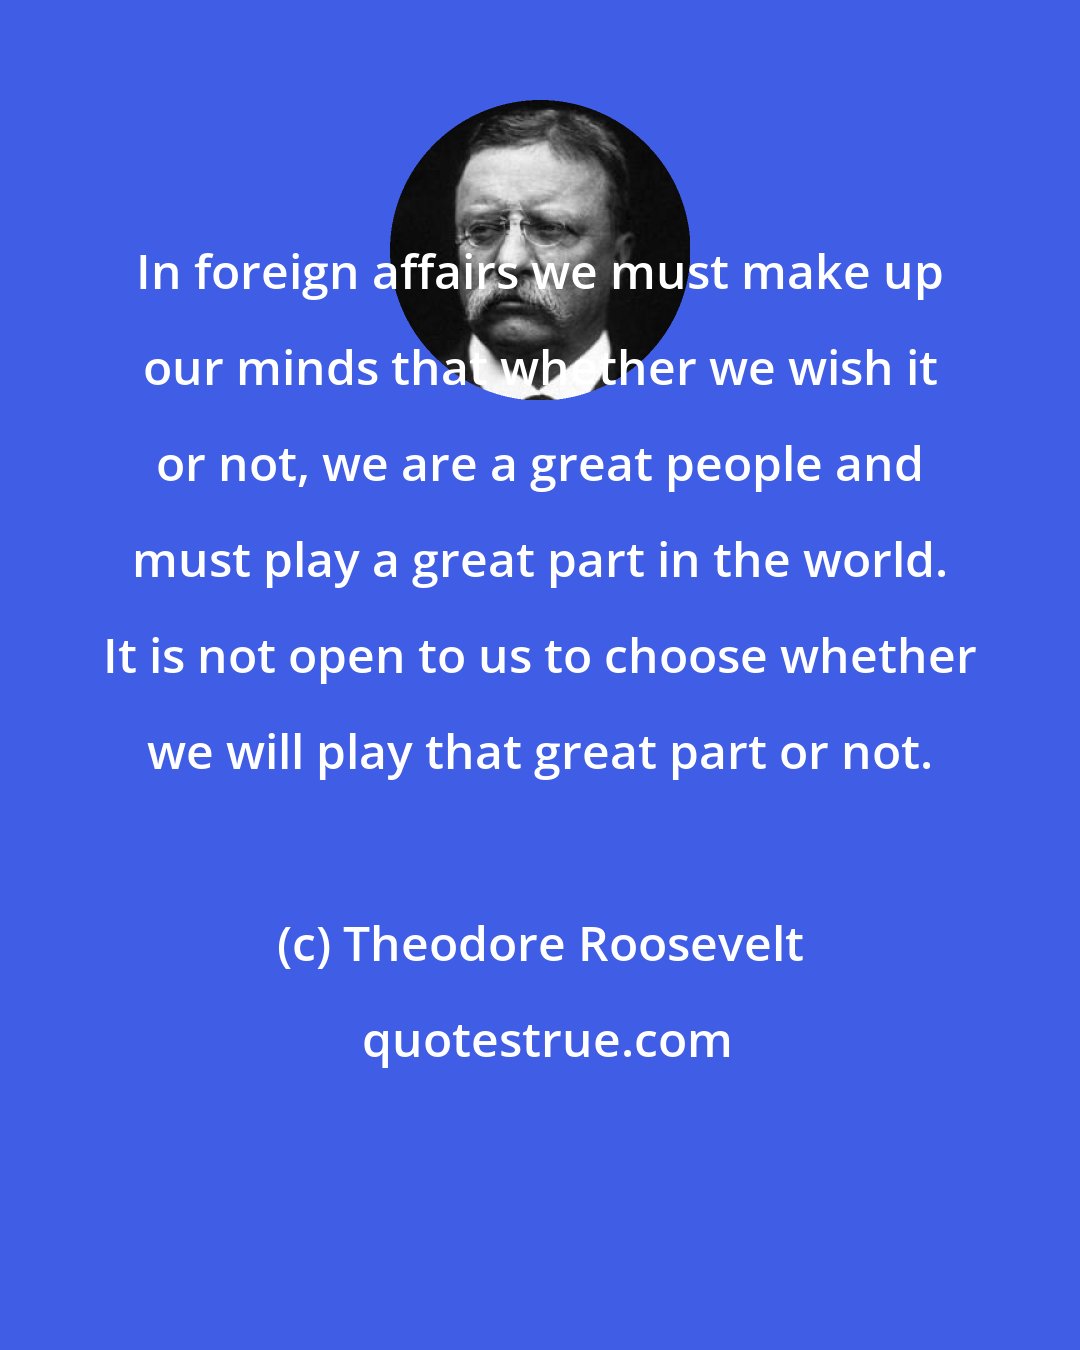 Theodore Roosevelt: In foreign affairs we must make up our minds that whether we wish it or not, we are a great people and must play a great part in the world. It is not open to us to choose whether we will play that great part or not.